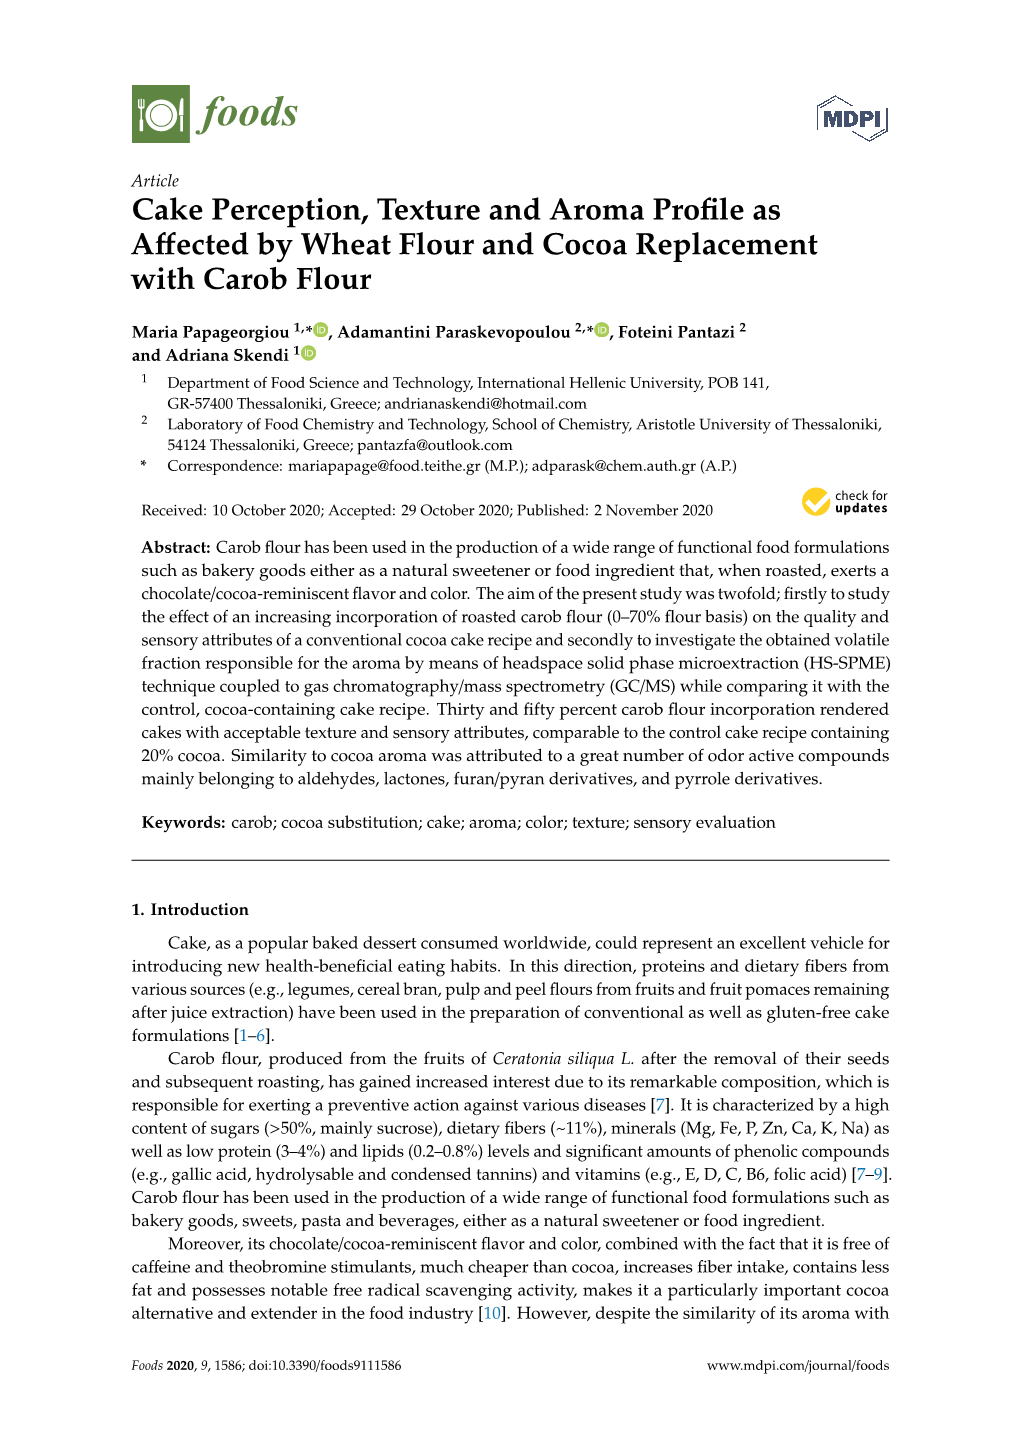 Cake Perception, Texture and Aroma Profile As Affected by Wheat Flour